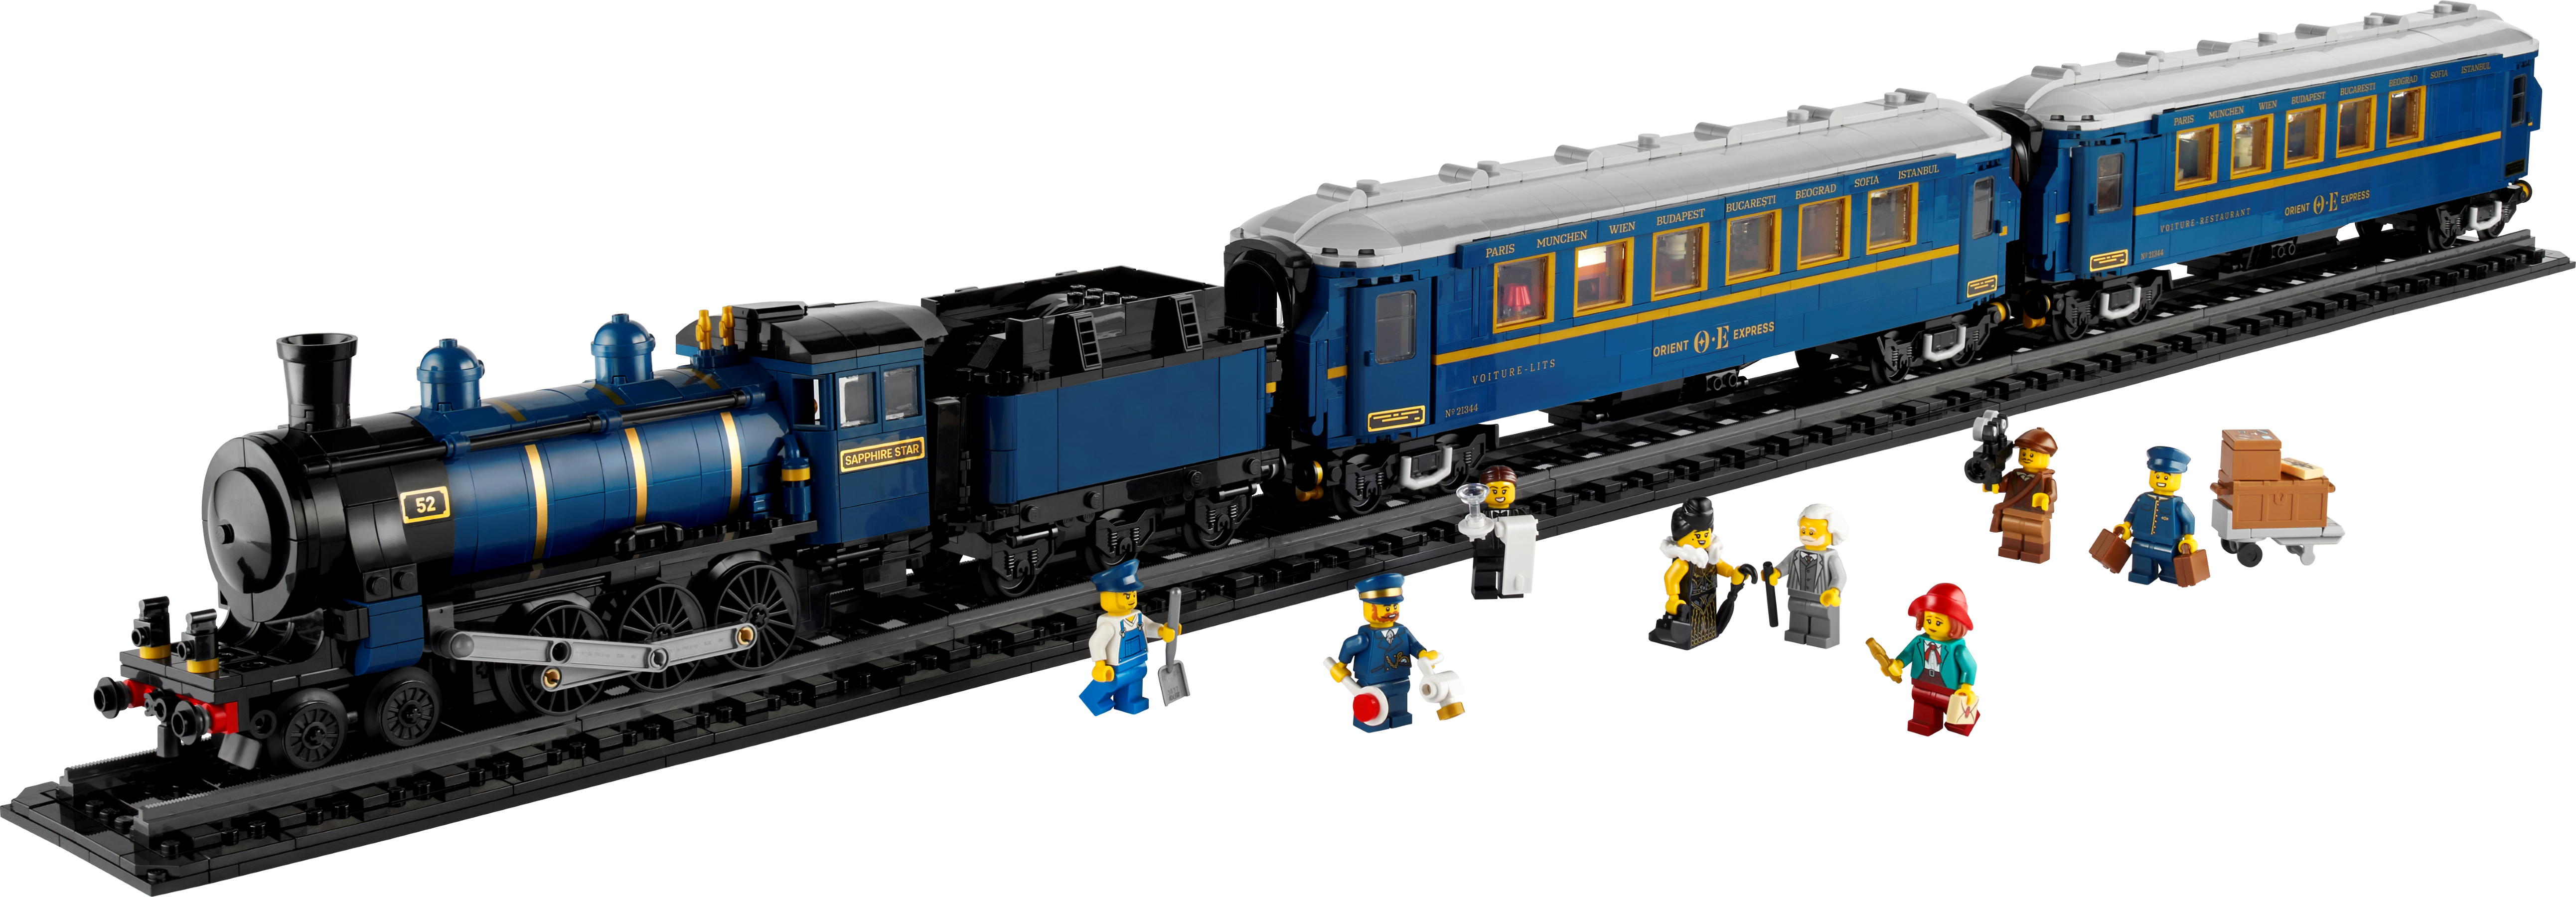 LEGO City Summer 2022 train sets revealed [News] - The Brothers